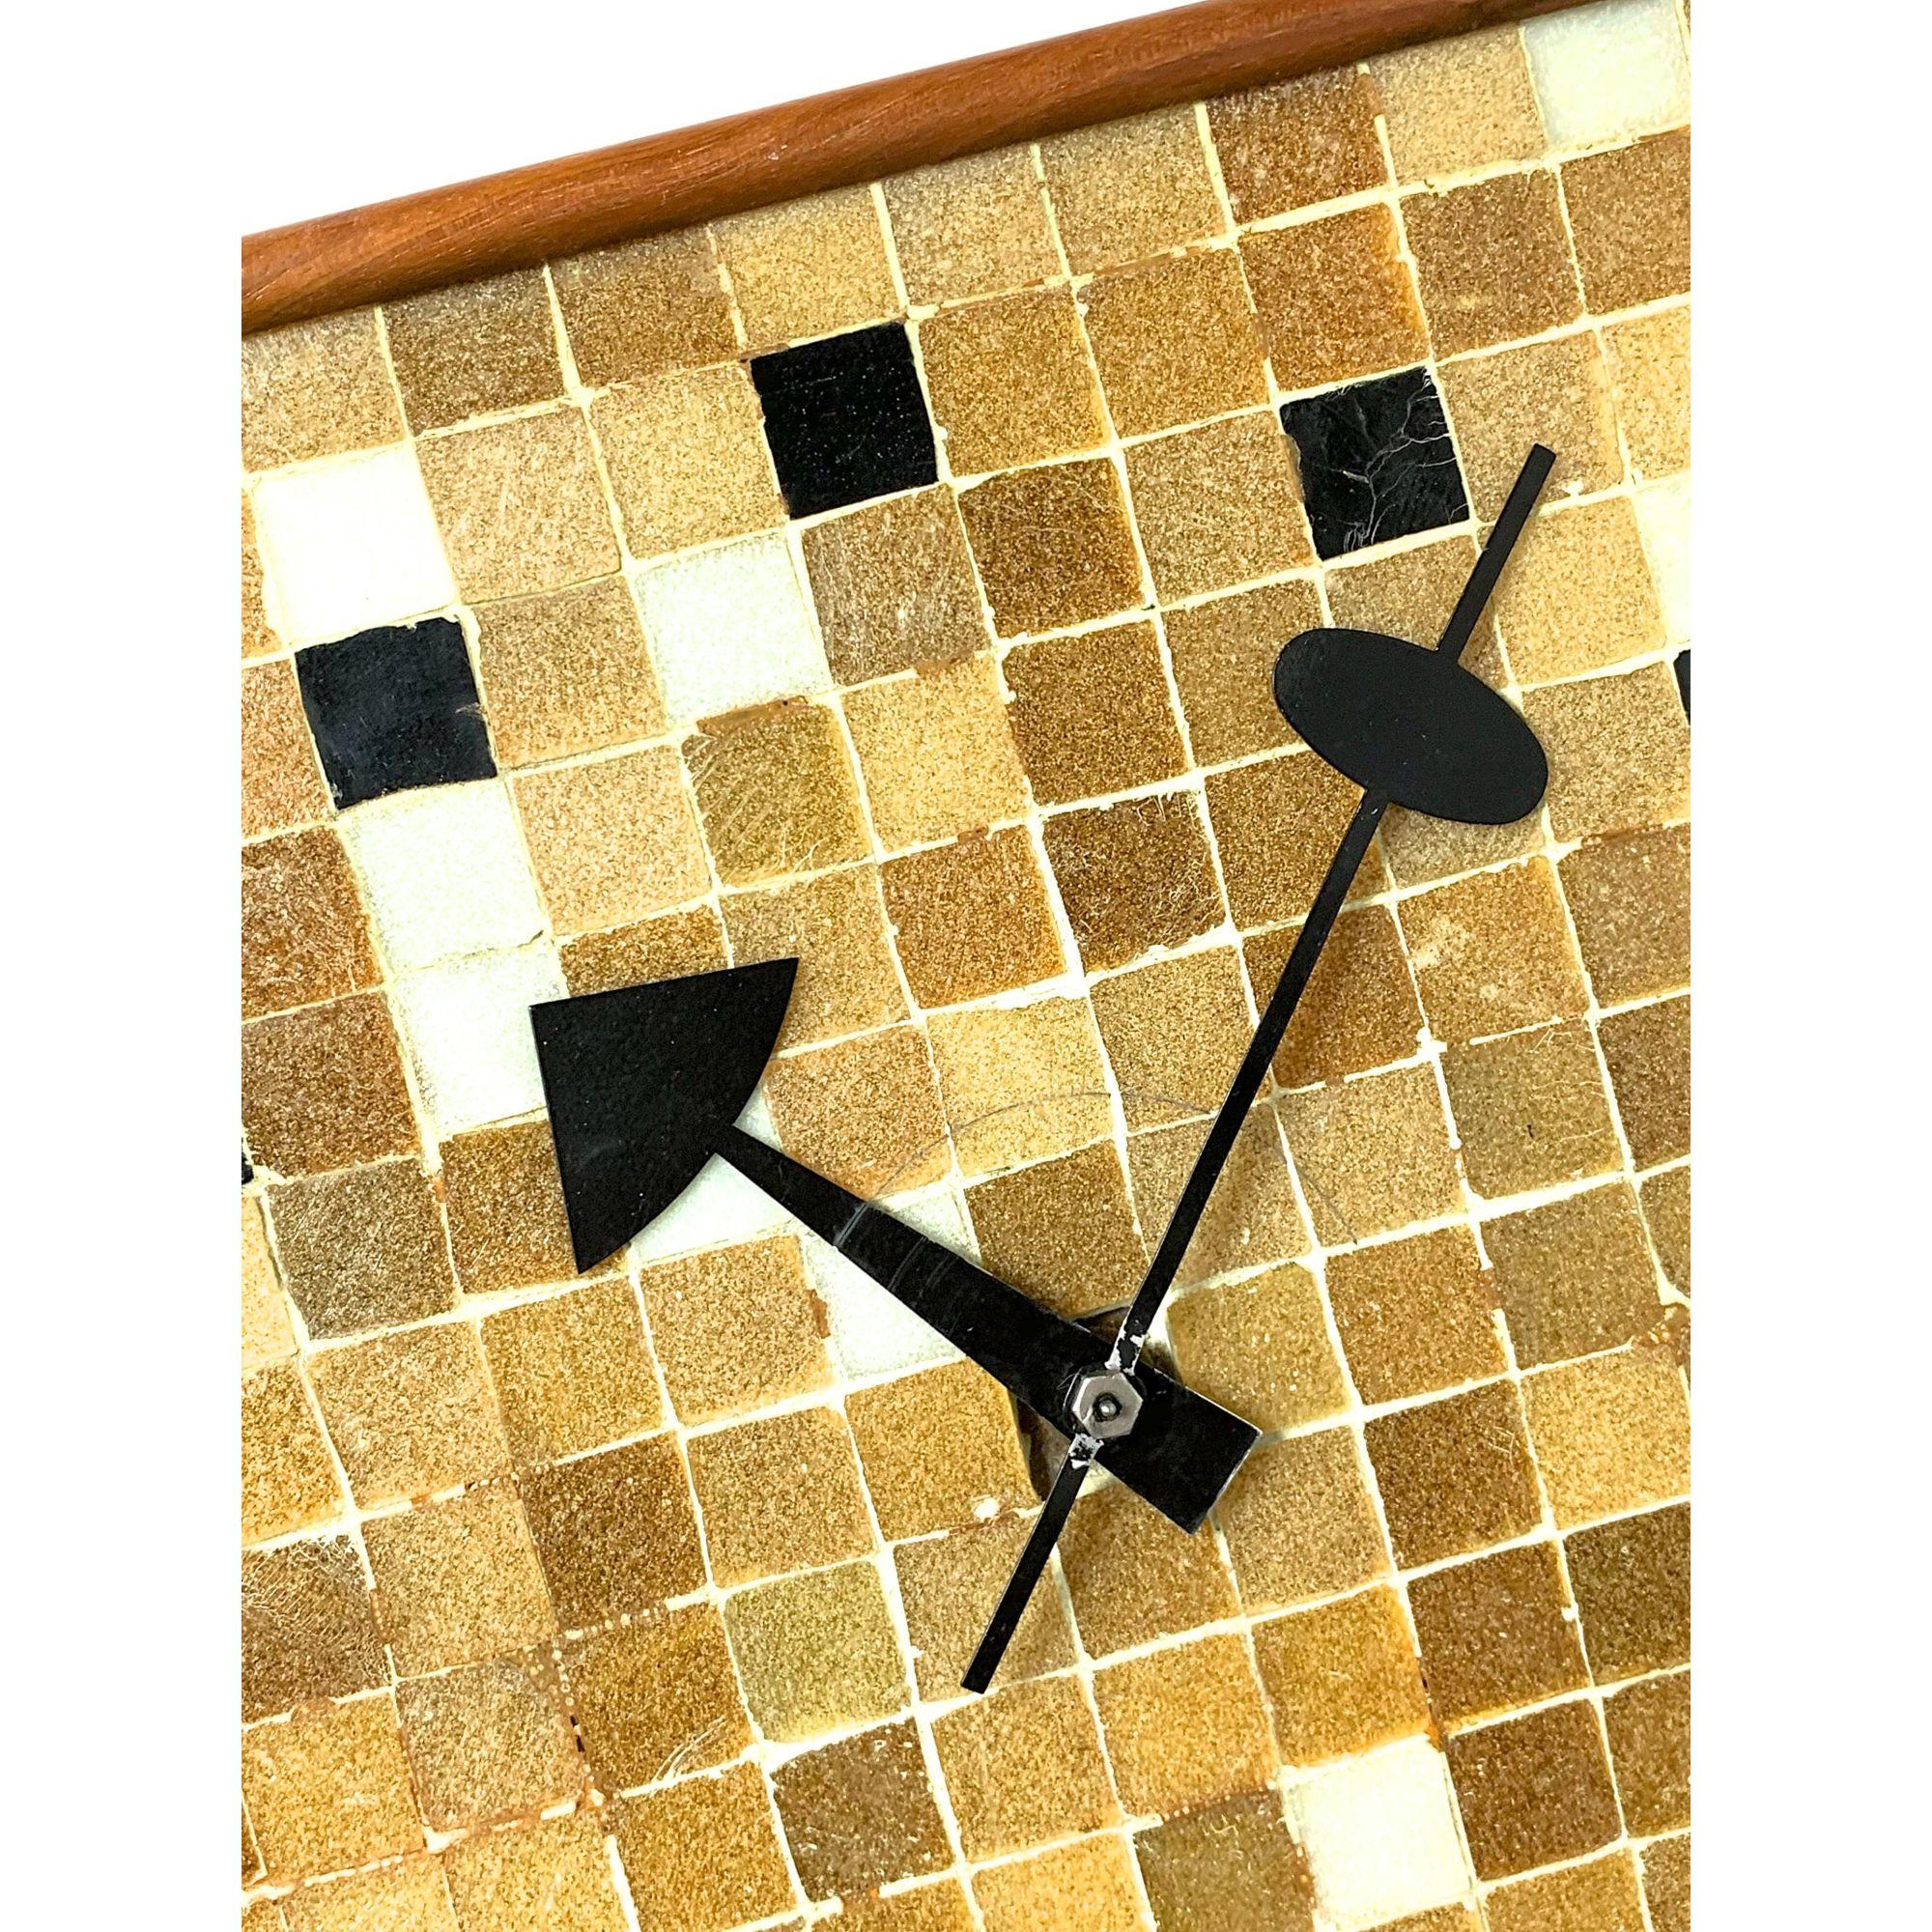 Mid-Century Modern Rare Mosaic Tile Wall Clock in Walnut by George Nelson & Assoc circa 1950s For Sale